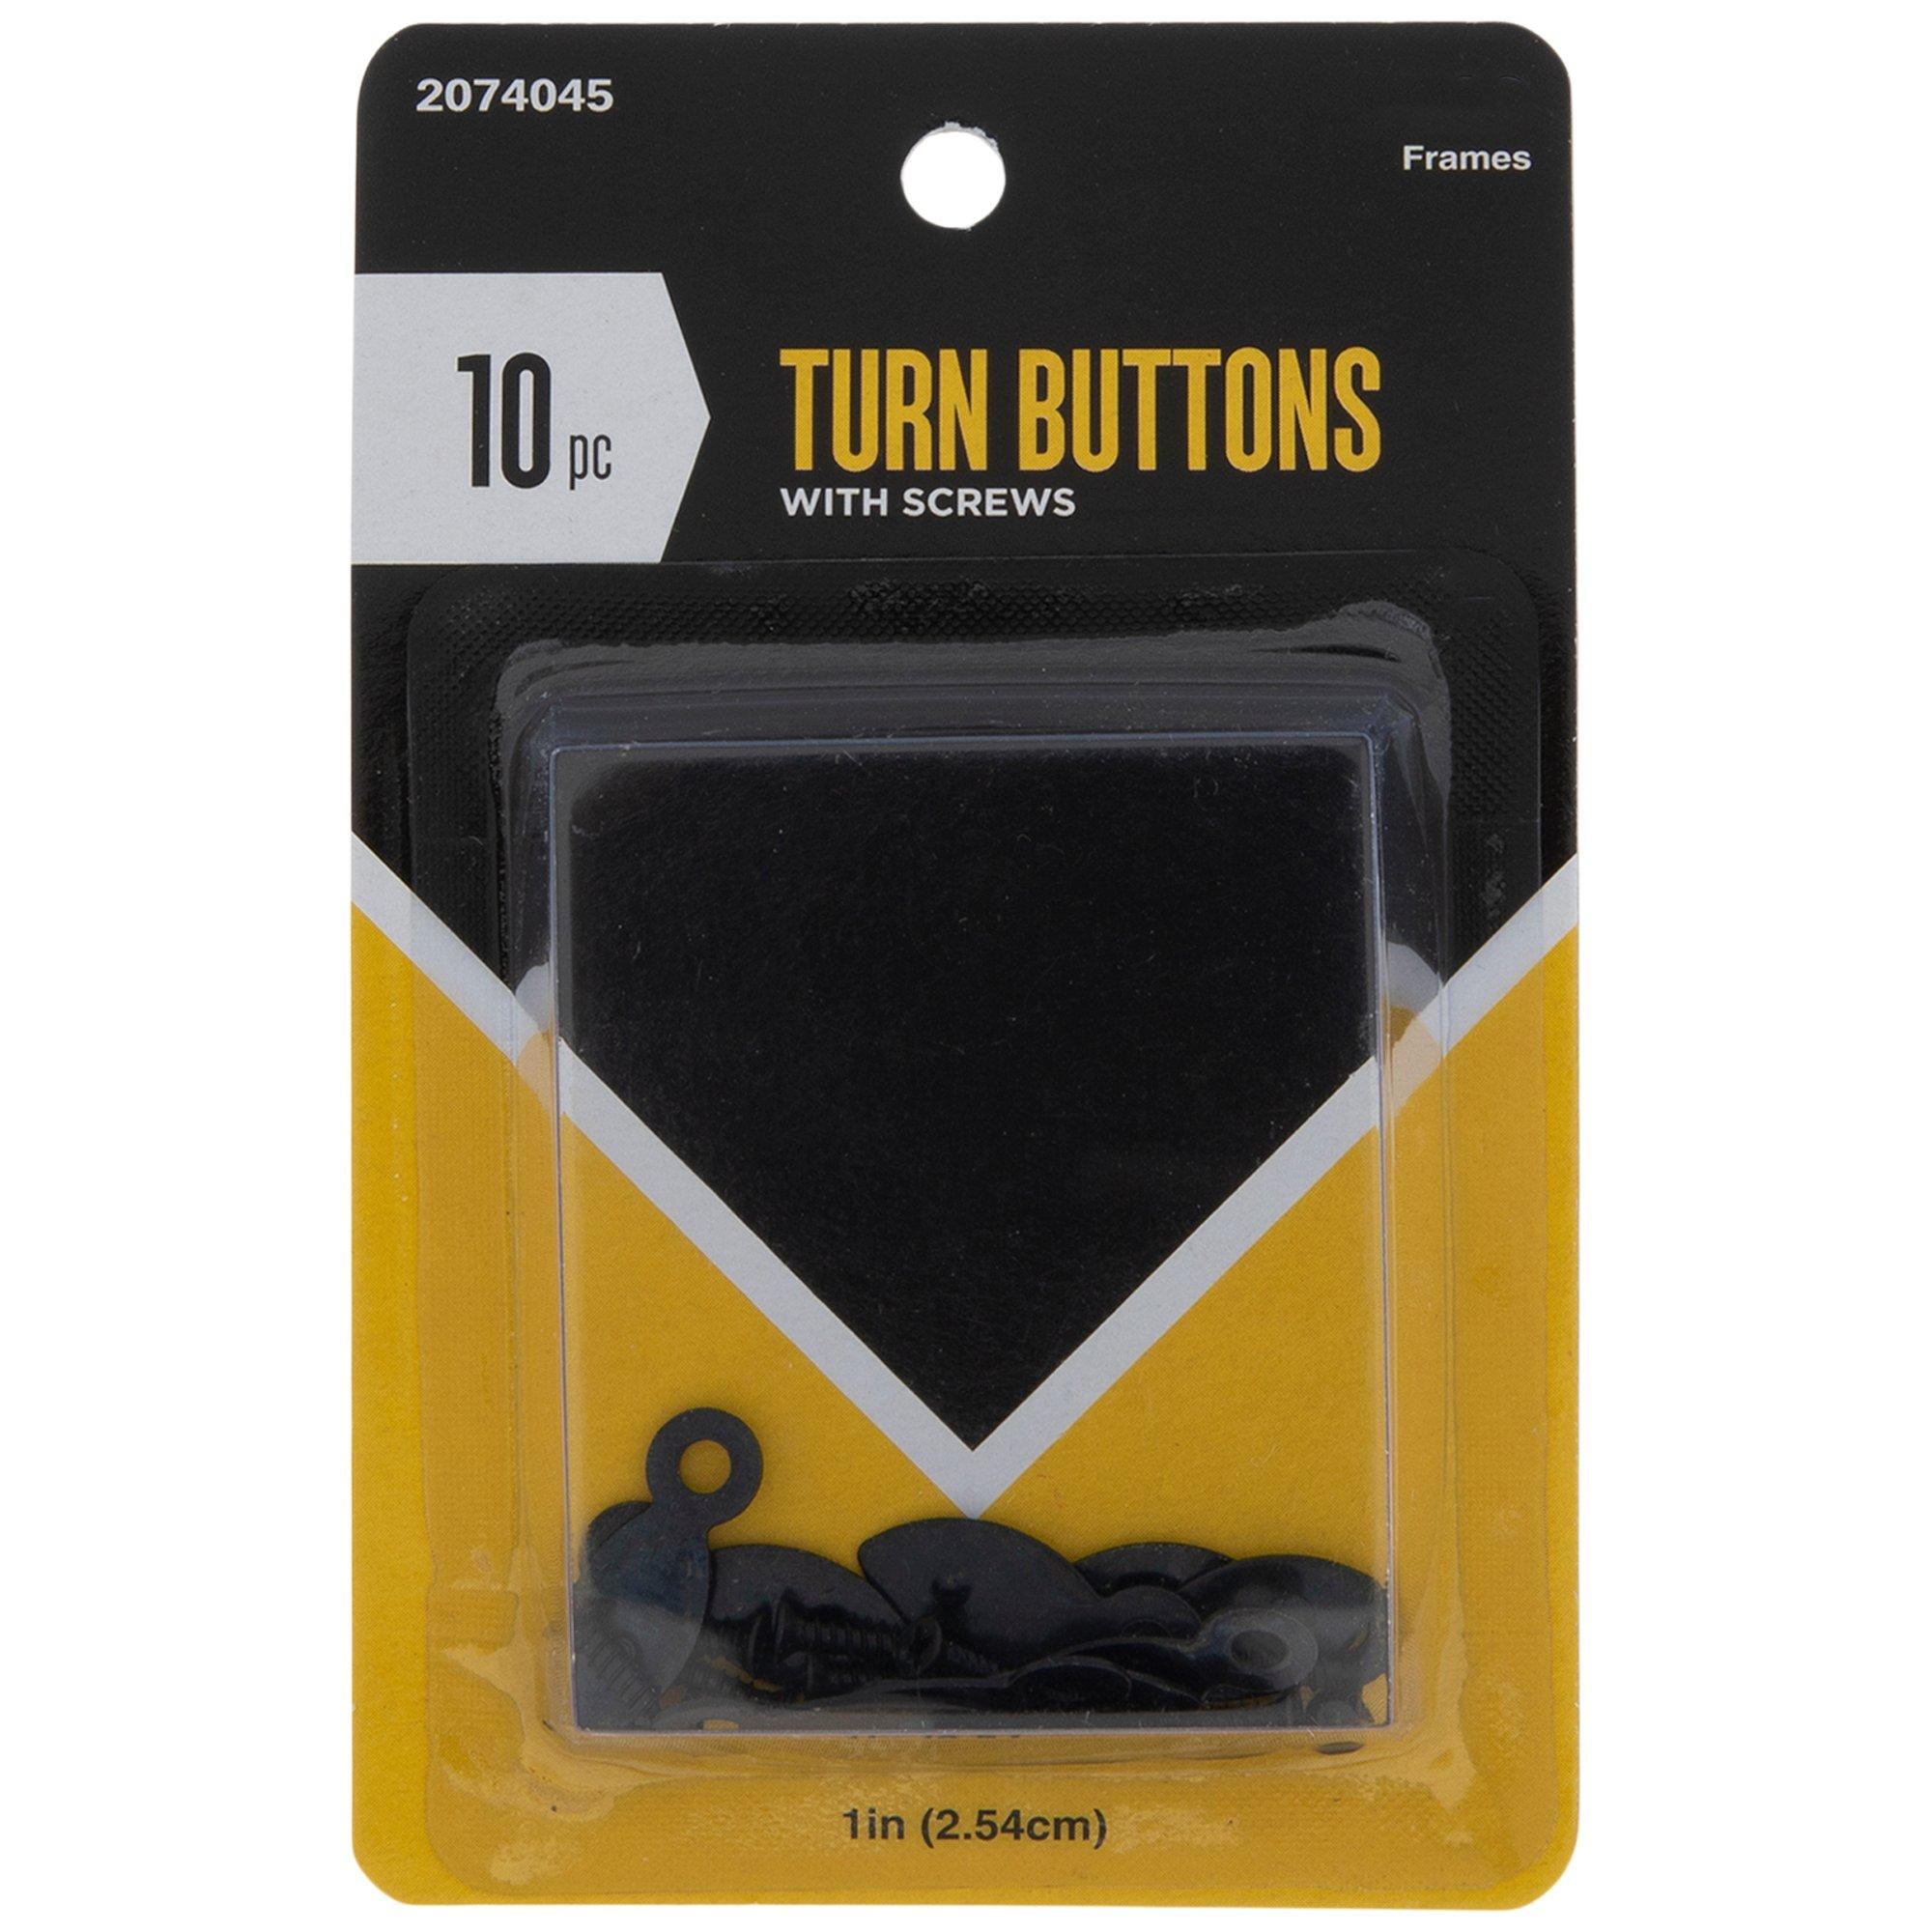 Turn Buttons & Frame Clips  LION Picture Framing Supplies Ltd